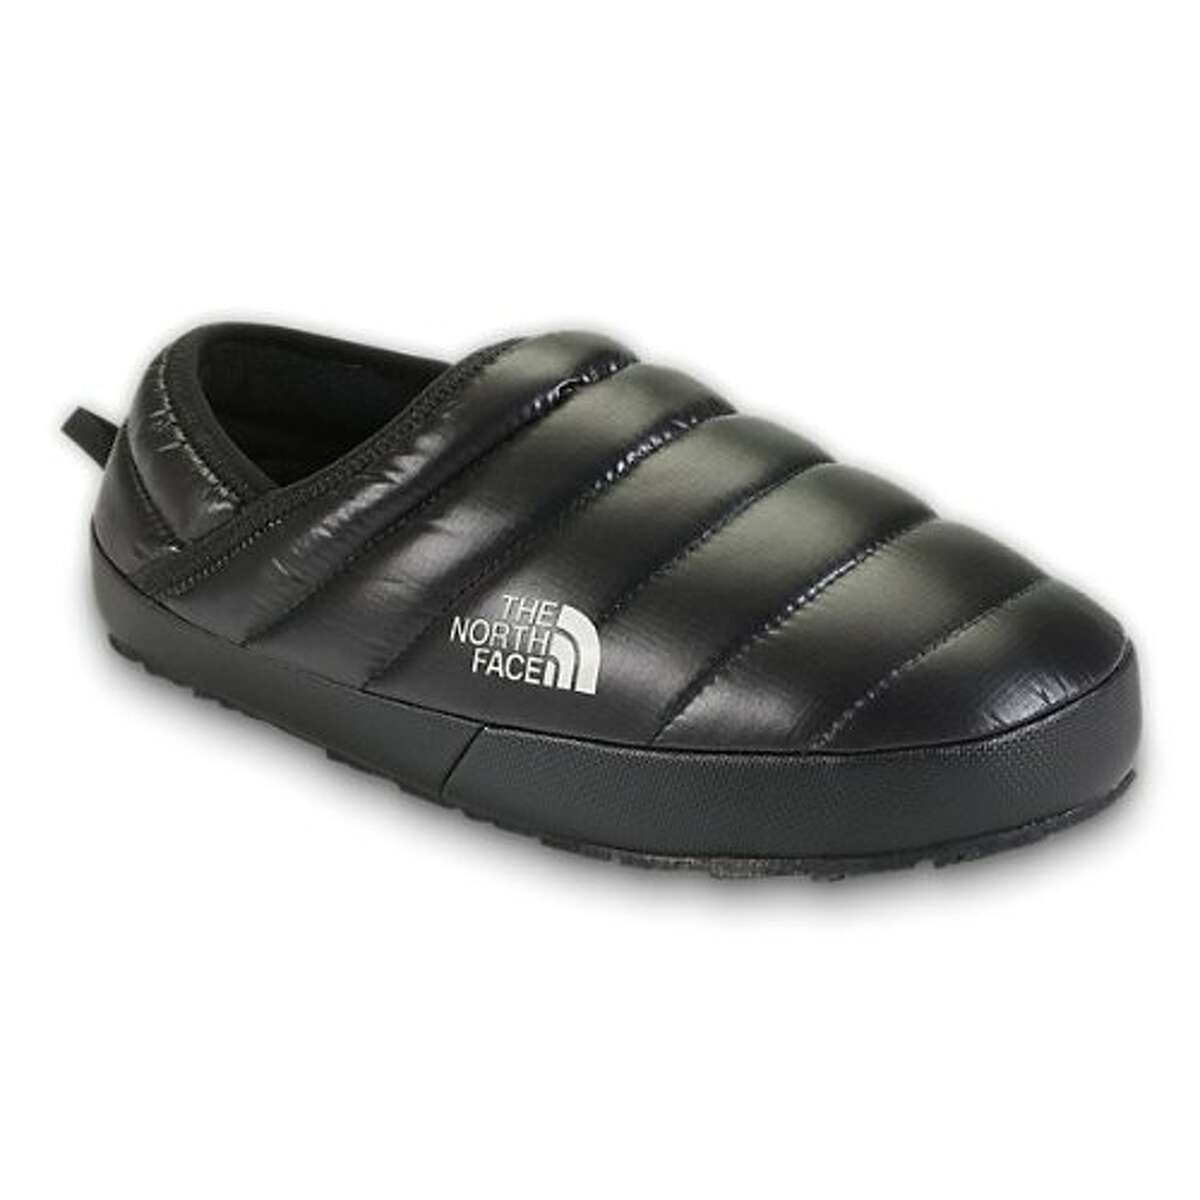 The North Face Thermoball Traction Mule Shiny Black Mens Slippers Amazon.com price: $49.95 Make sure his feet are cozy while he climbs Mount Washington this winter. Buy It Now